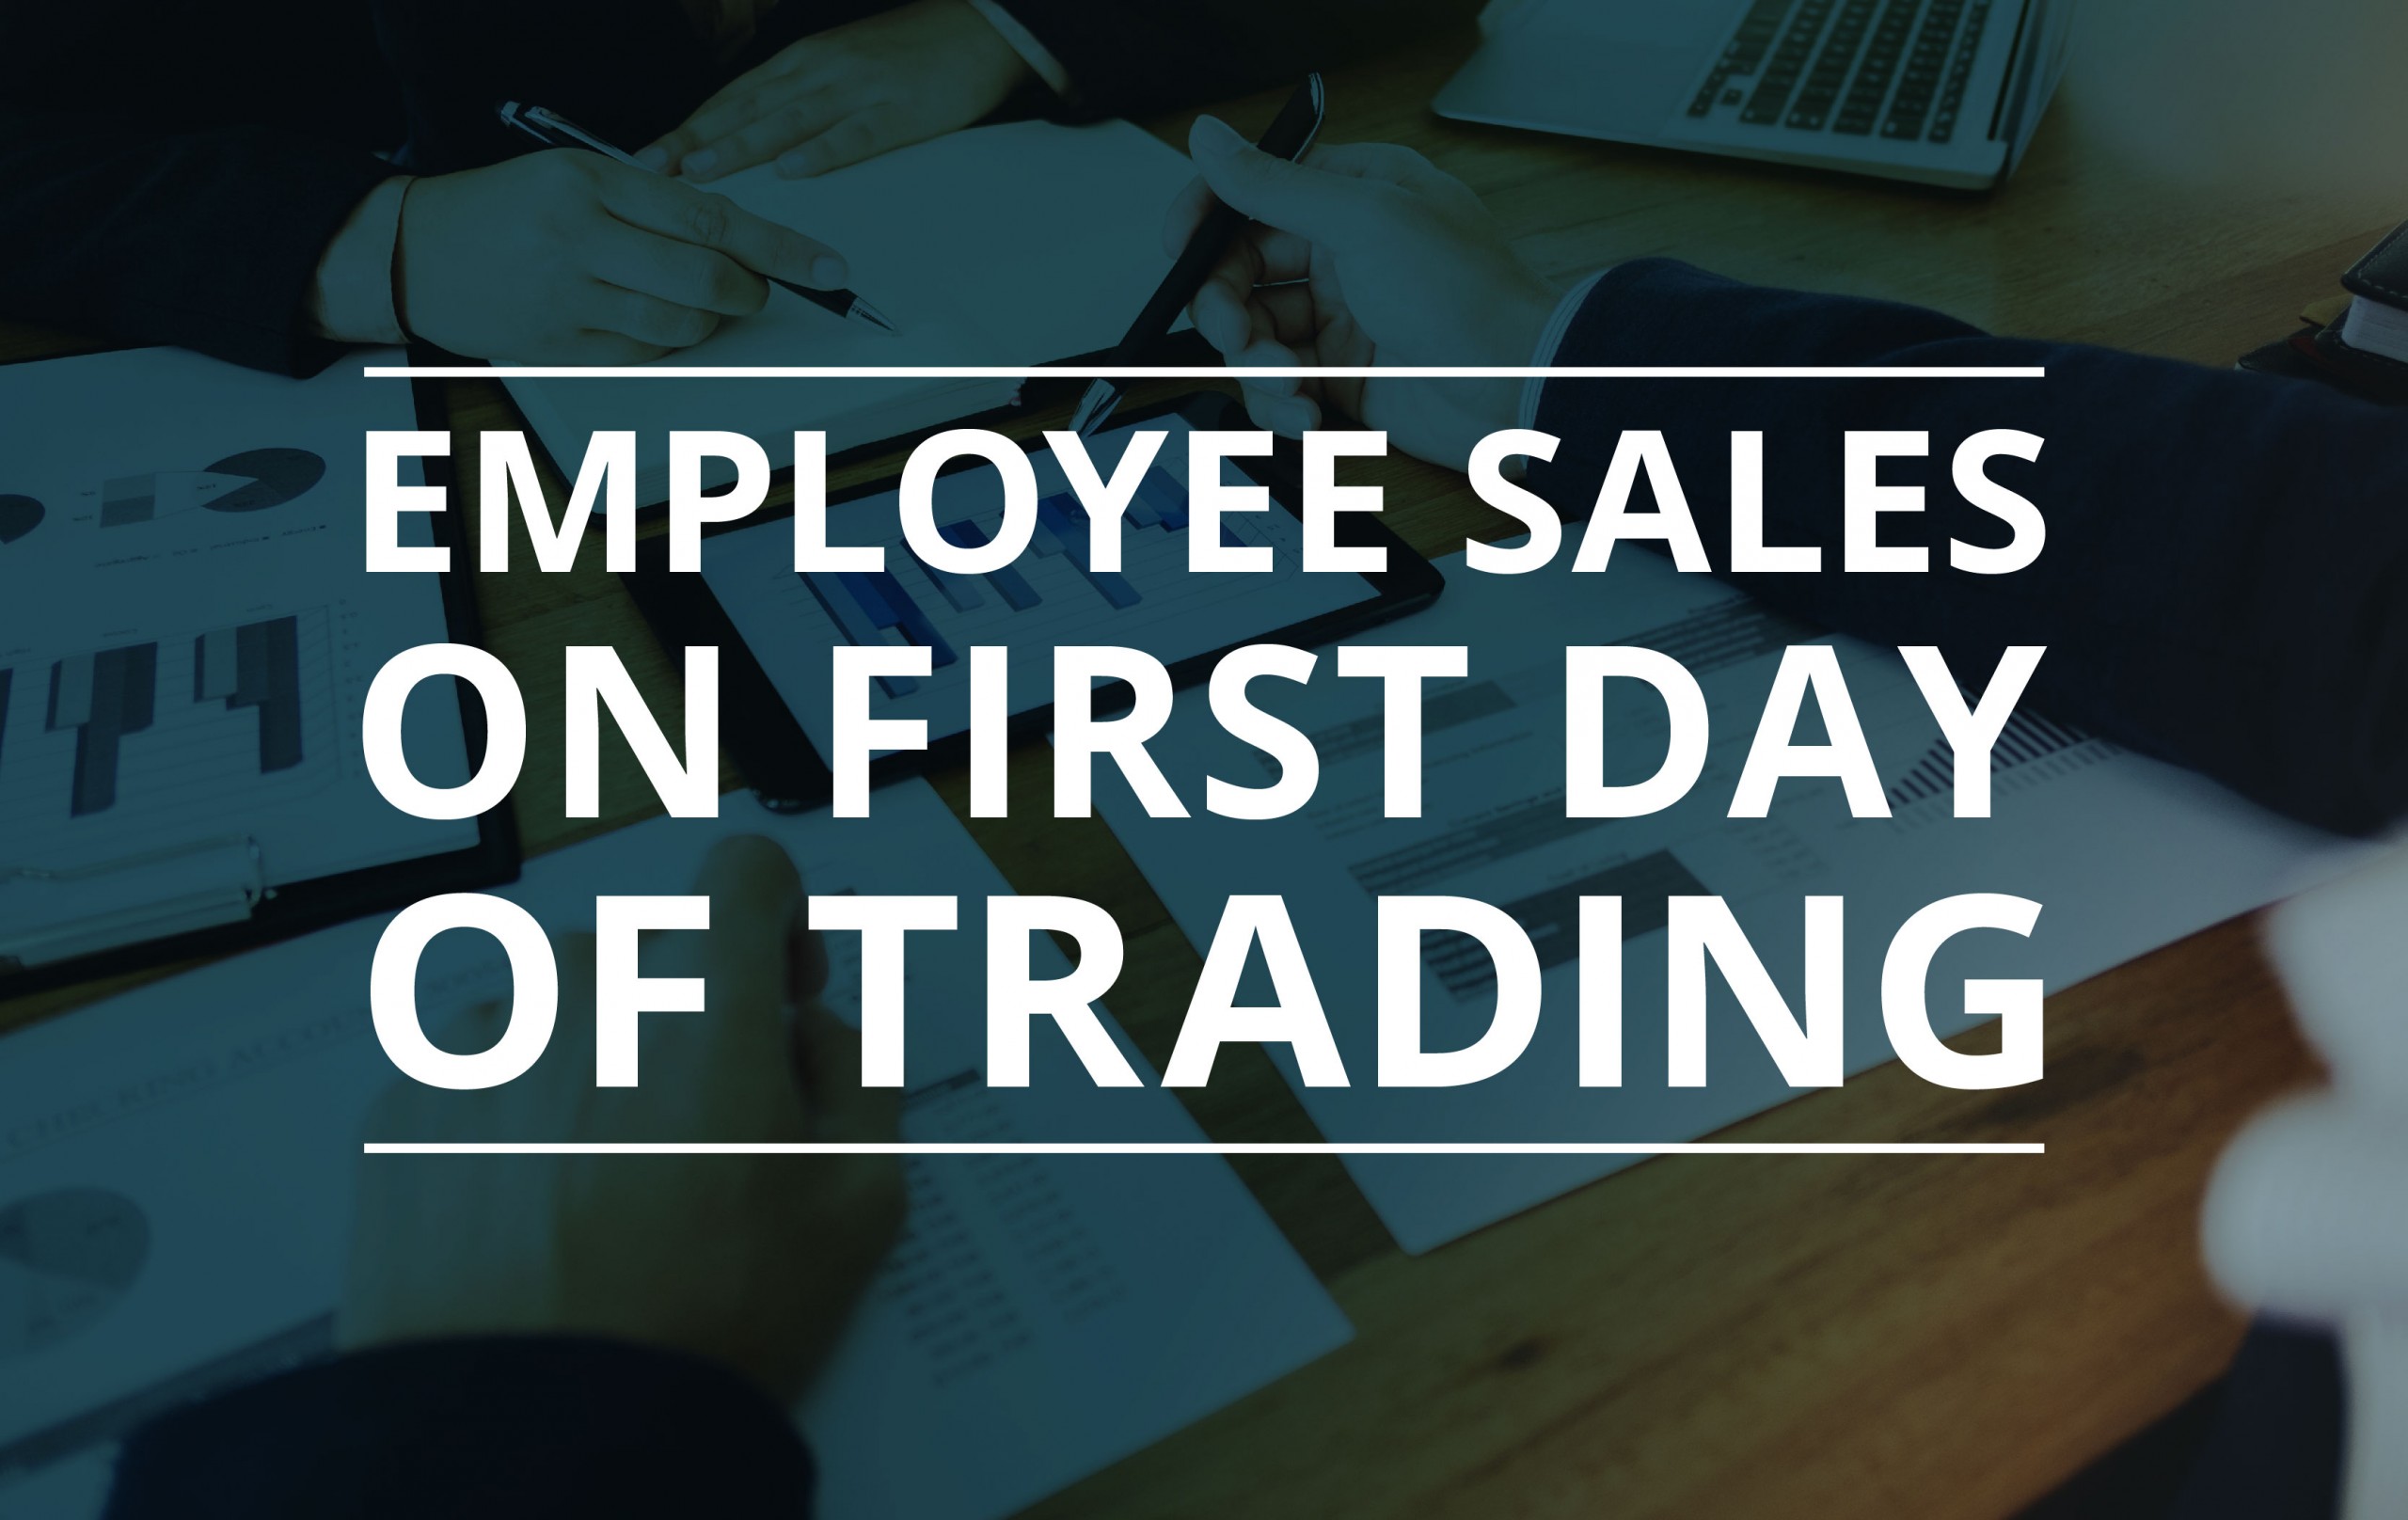 image for Employee Sales on First Day of Trading